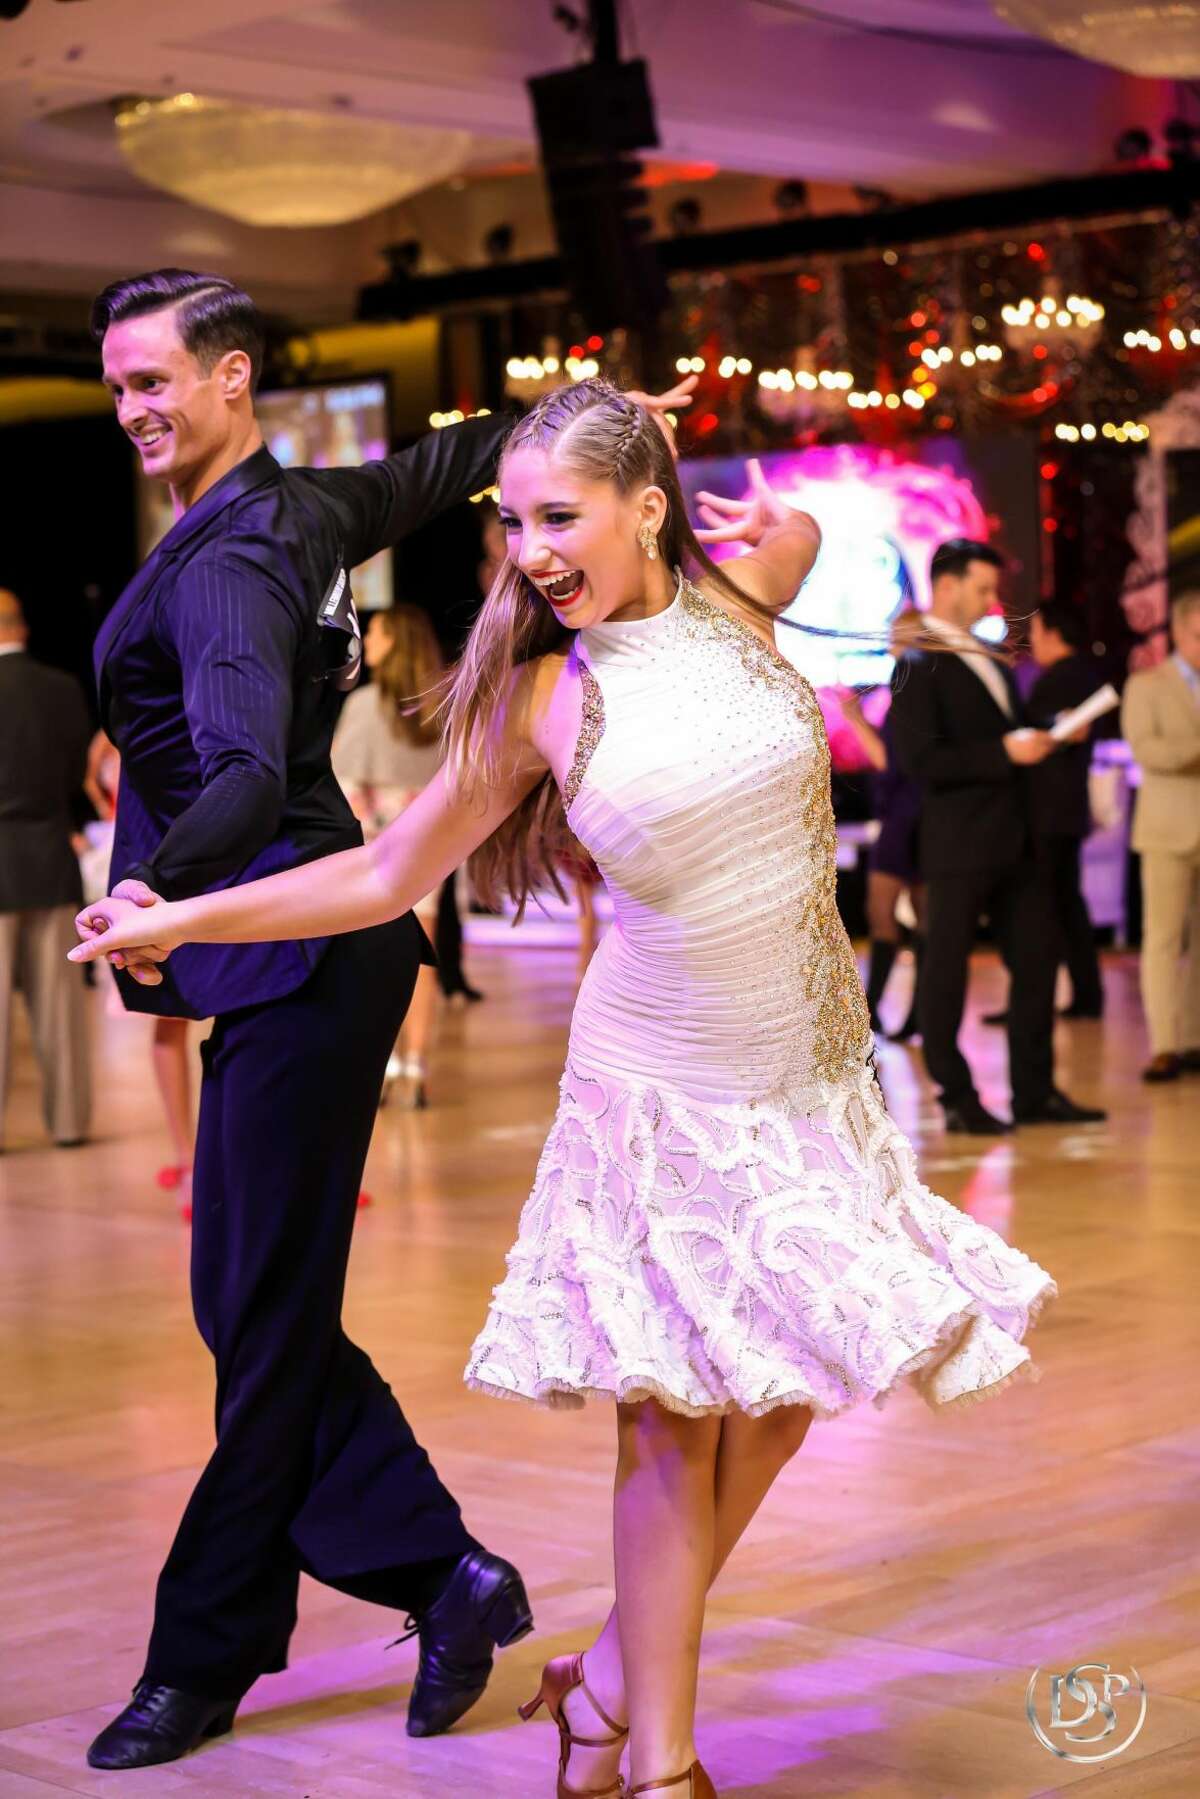 Strictly ballroom The remarkable journey of Ariel Mayer 14-year-old ballroom champion photo